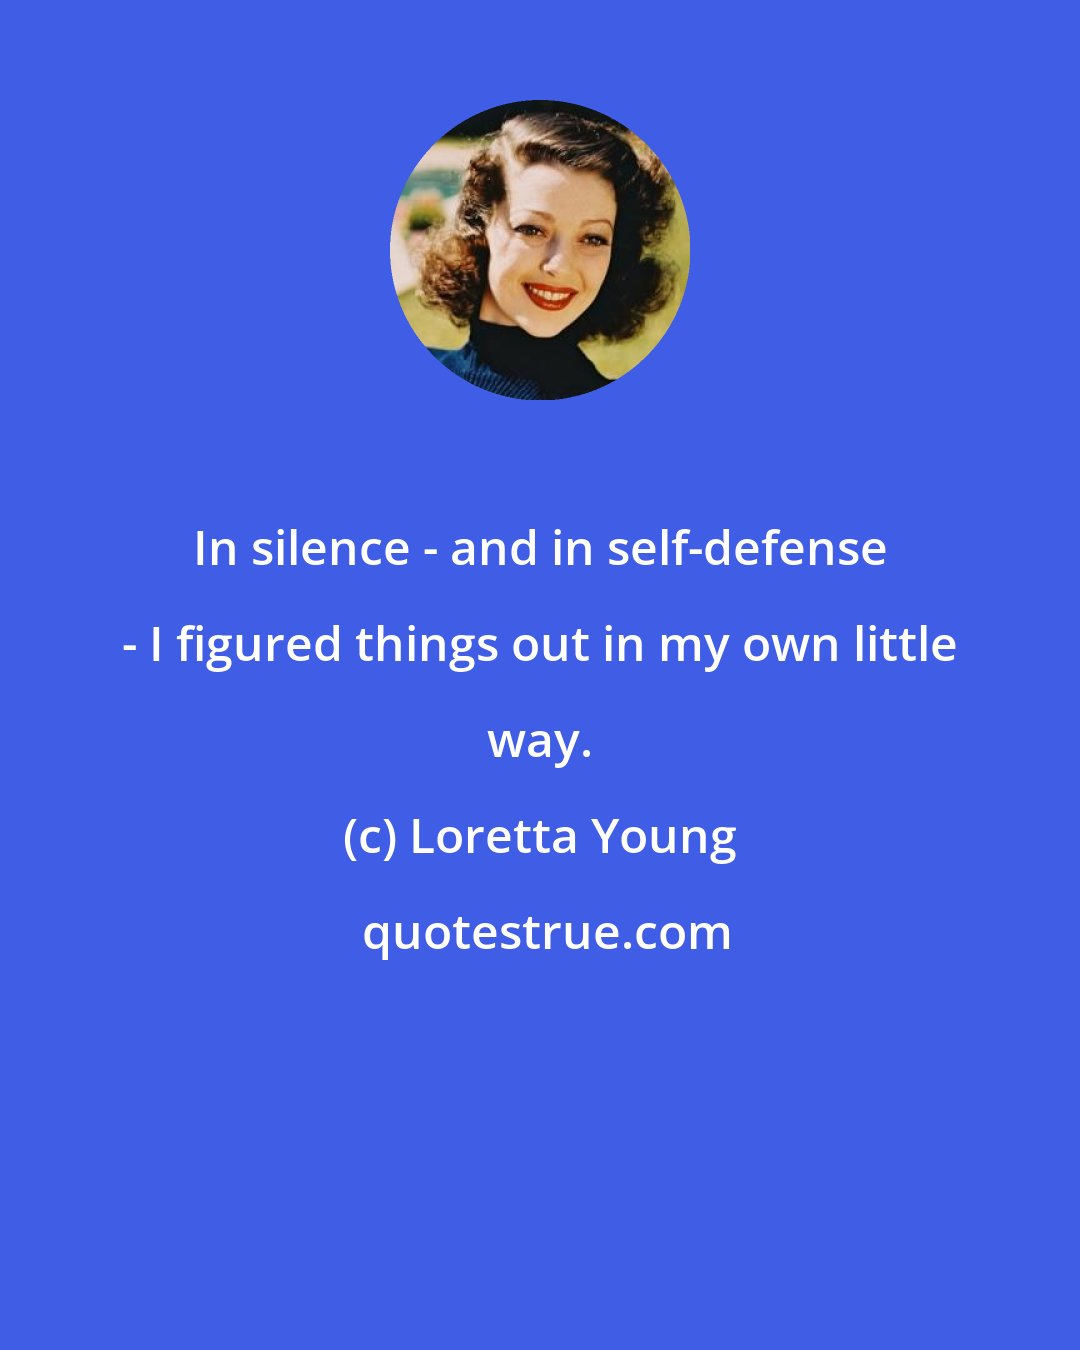 Loretta Young: In silence - and in self-defense - I figured things out in my own little way.